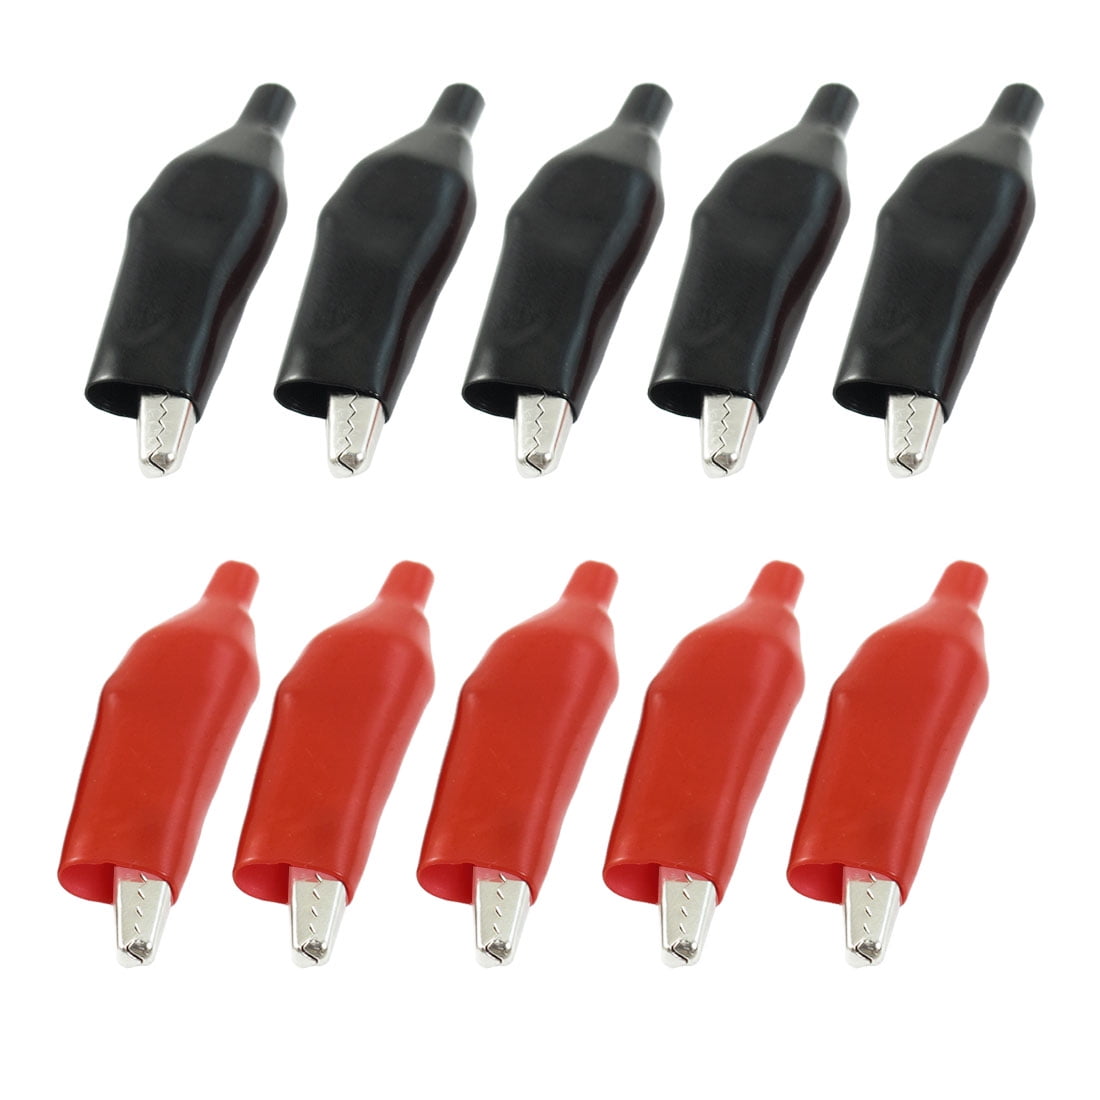 10X 75mm 30A Crocodile Alligator Car Battery Insulated Clip Clamps Red+Blac-ca 